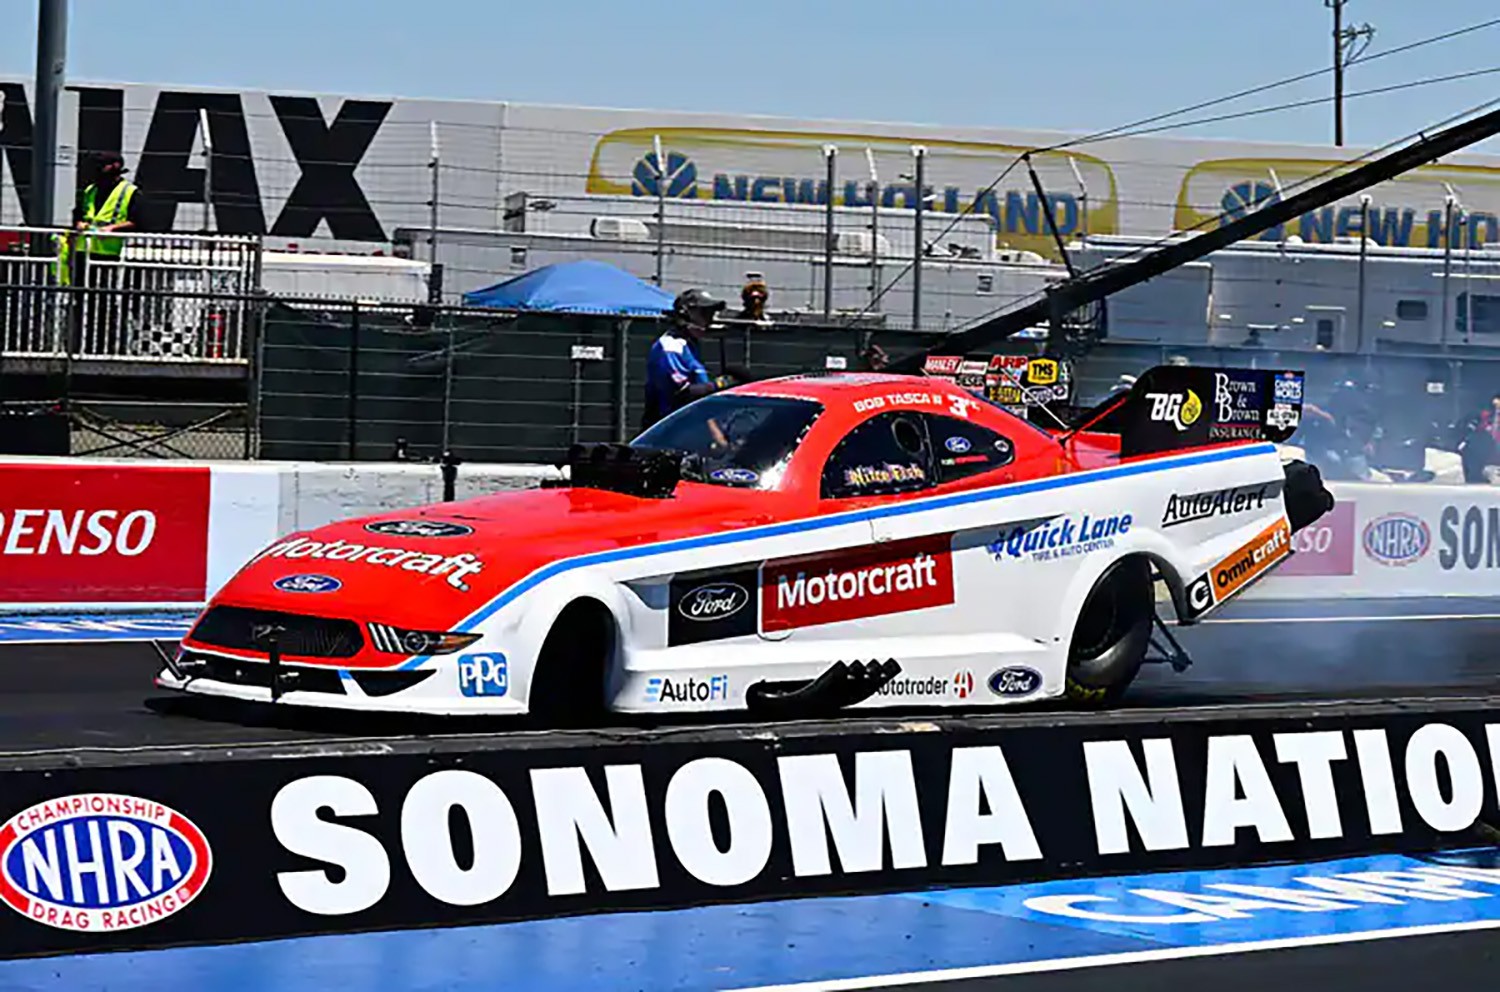 Bob Tasca Iii And Ford Racing Team Win At Nhra Sonoma Nationals